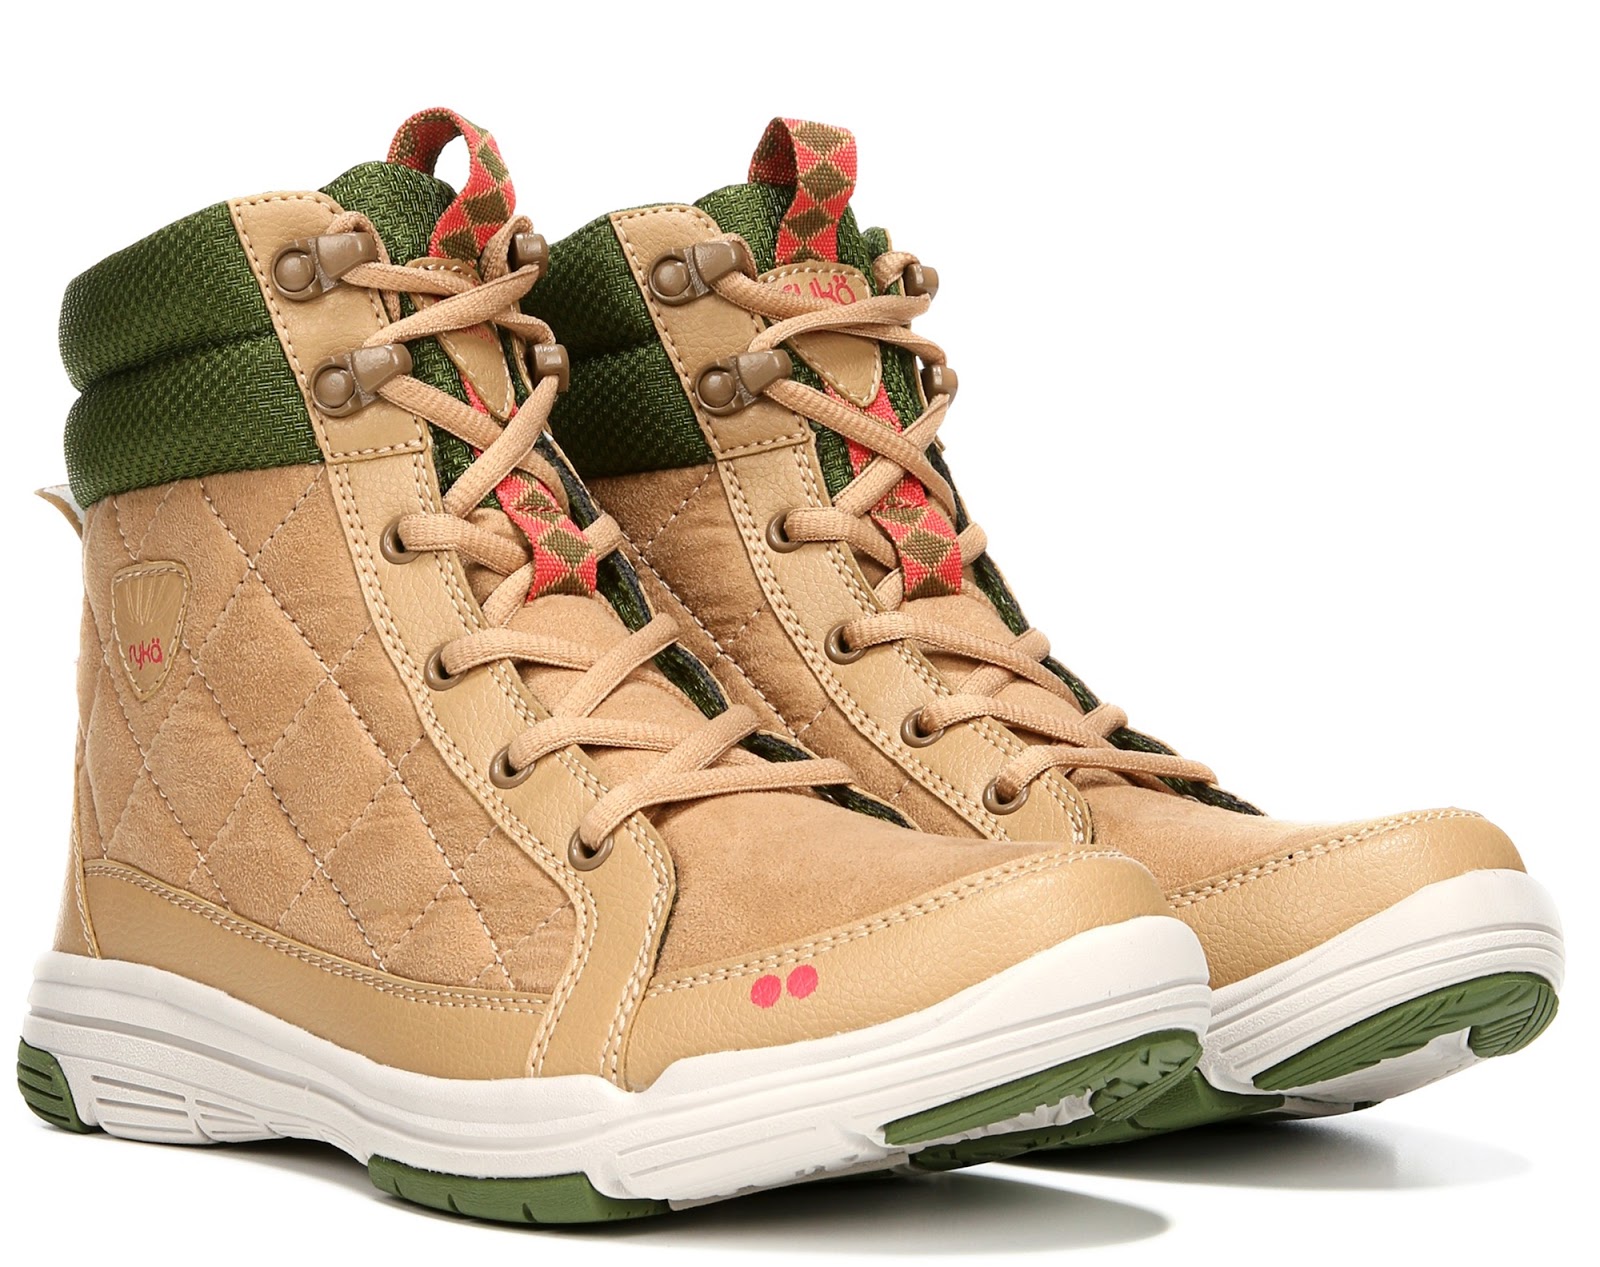 Shoe of the Day | Ryka Aurora Sneaker Boots | SHOEOGRAPHY